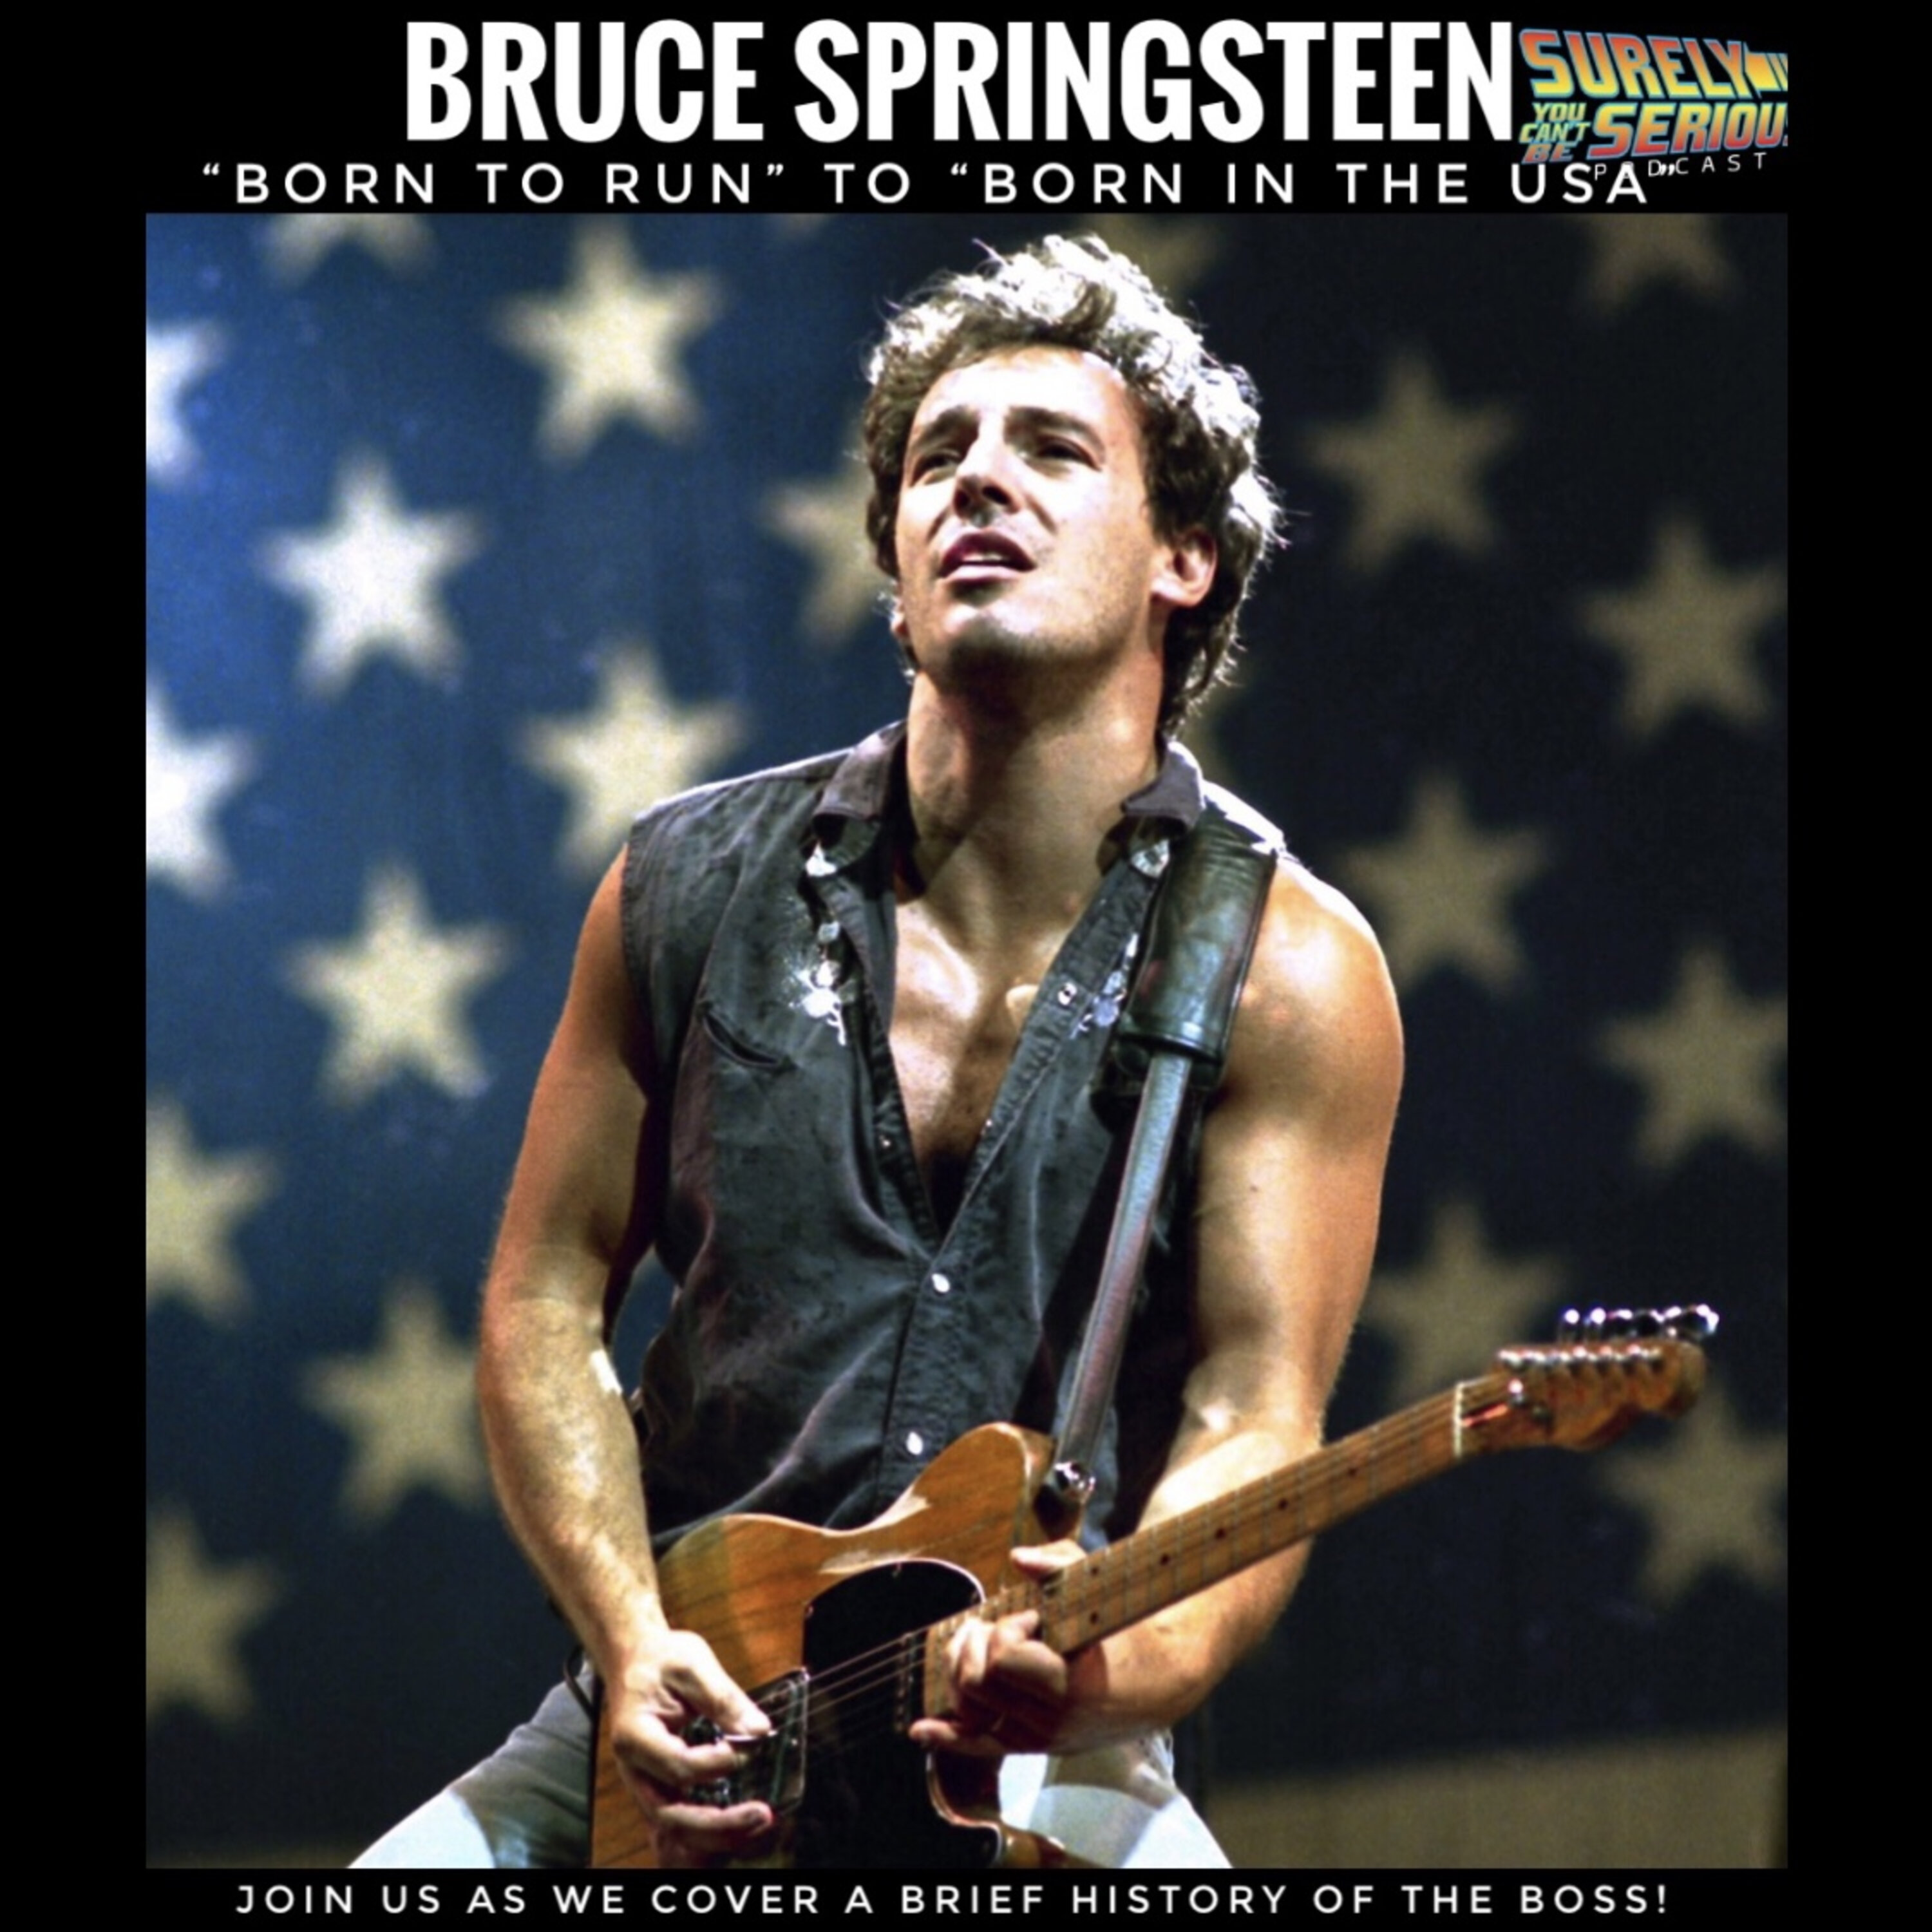 Bruce Springsteen: "Born to Run" to "Born in the USA" Image